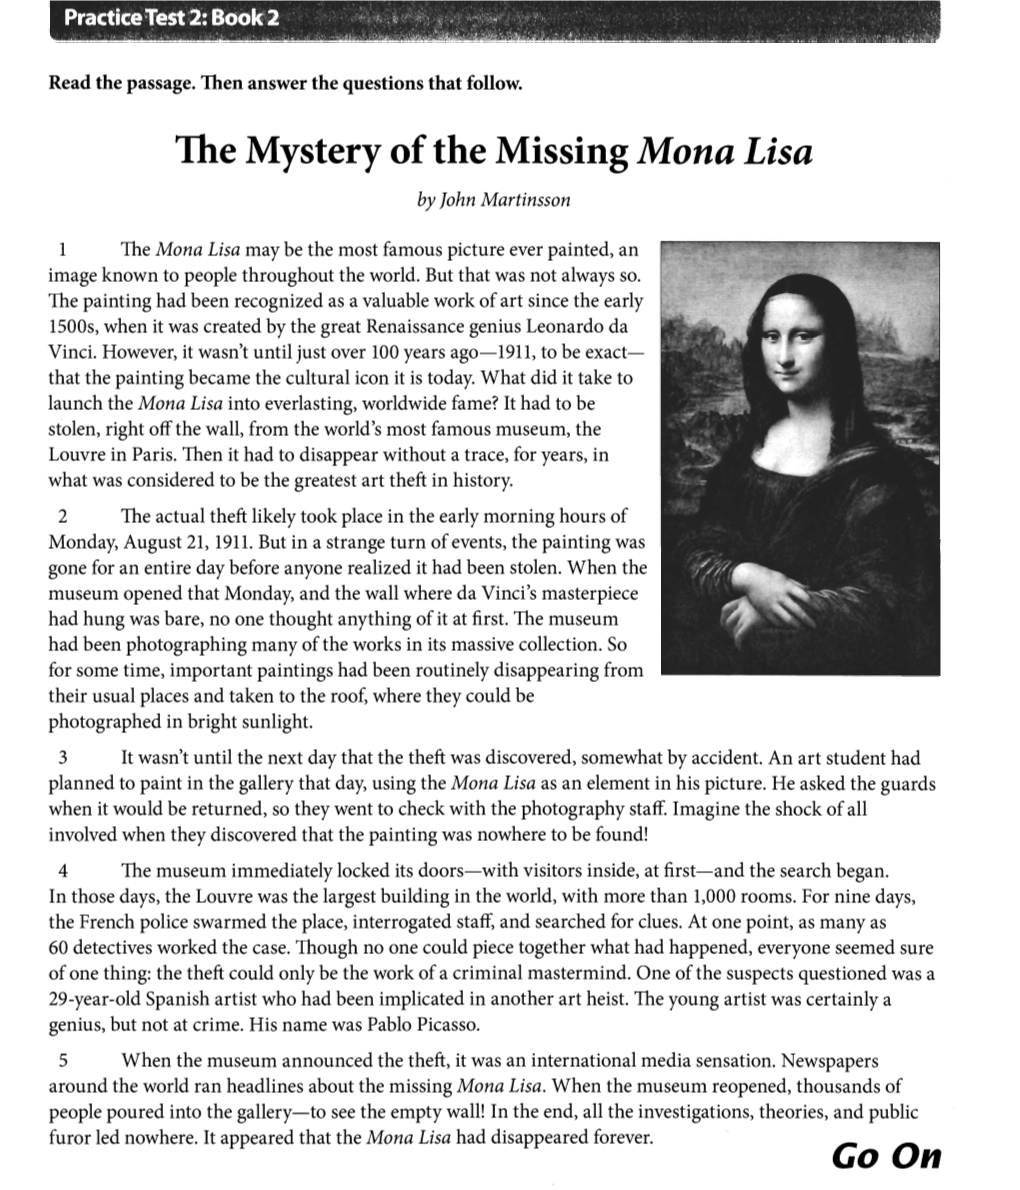 The Mystery of the Missing Mona Lisa